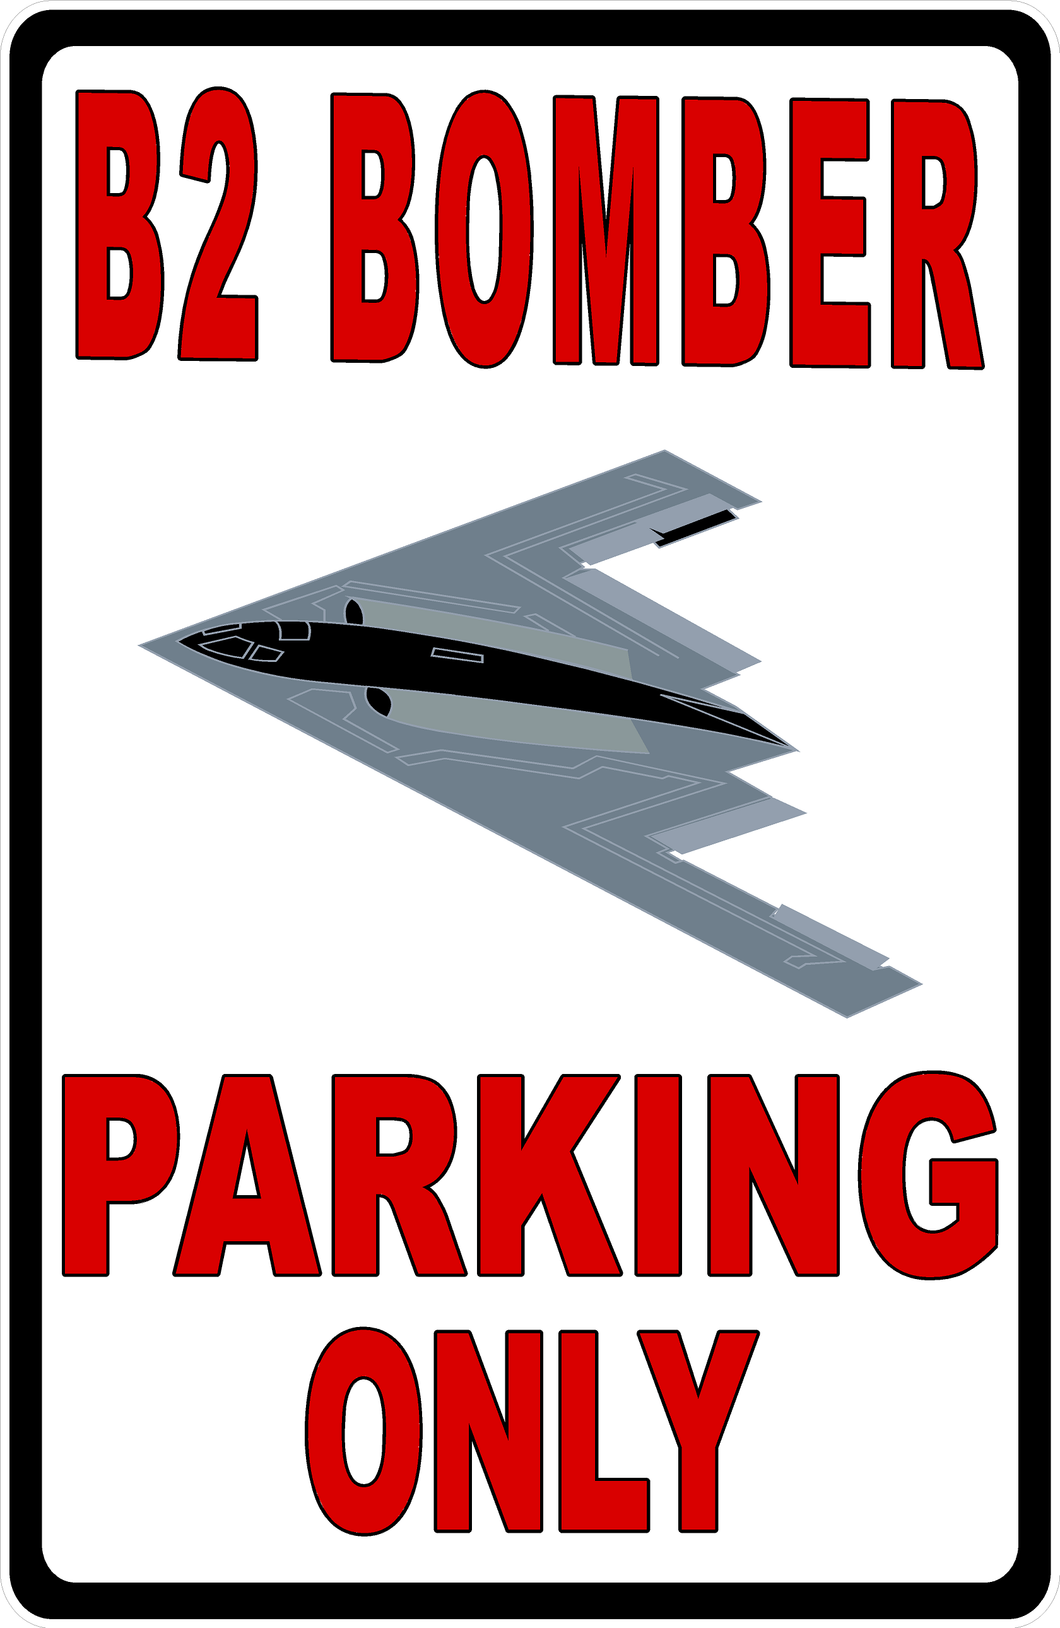 B2 Bomber Parking Only Sign